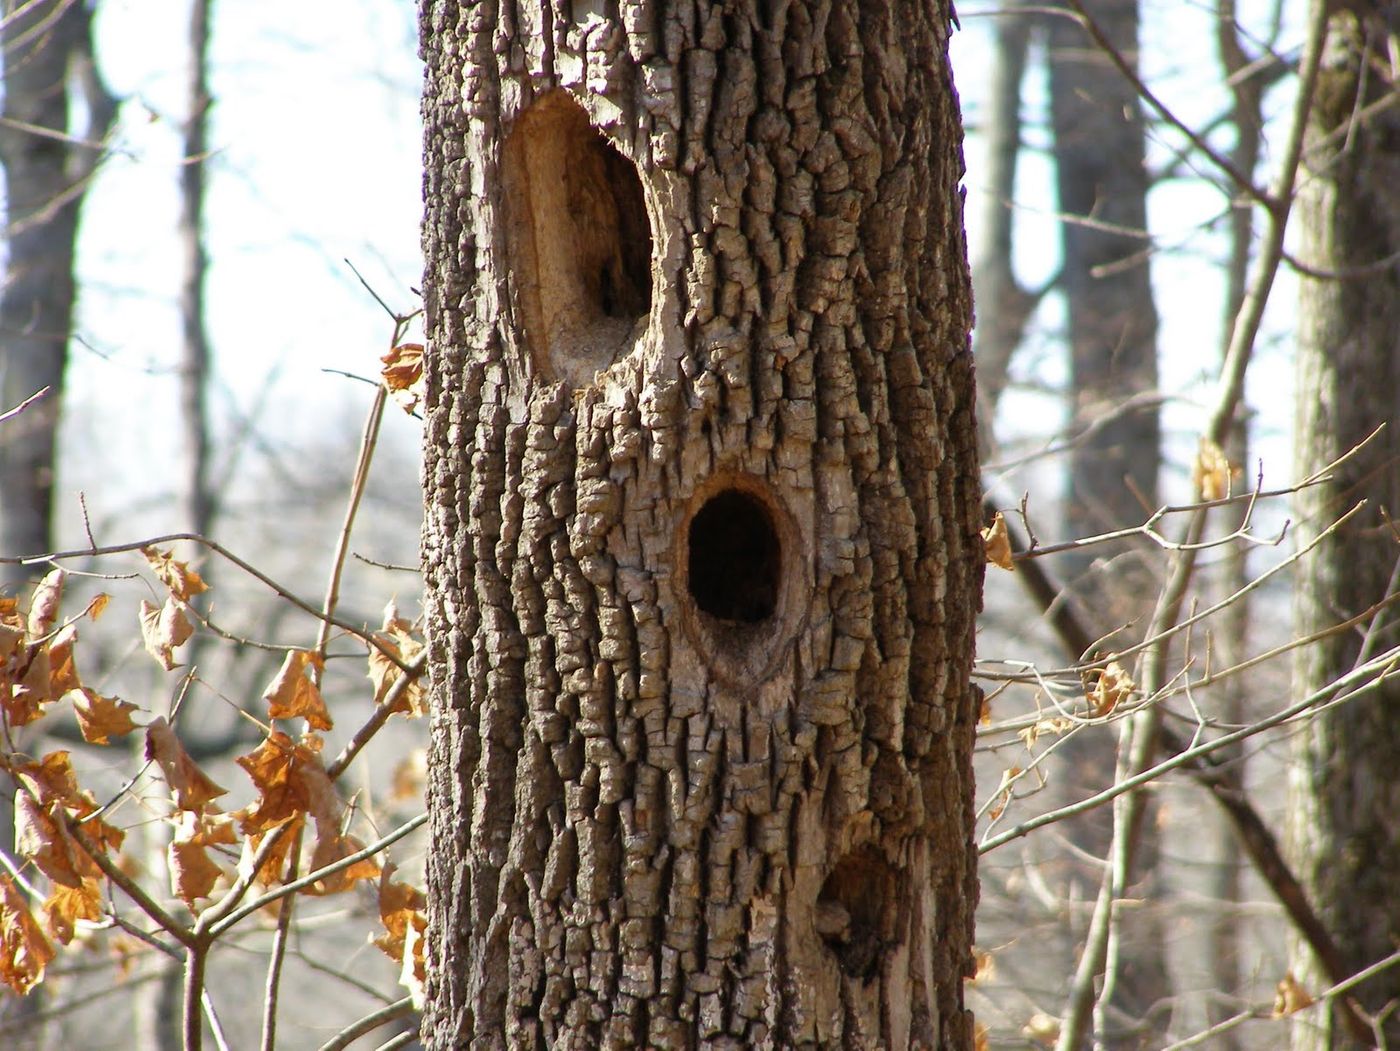 Woodpeckers create holes in trees for various reasons, but do they call upon wood-eating fungi to help make them?